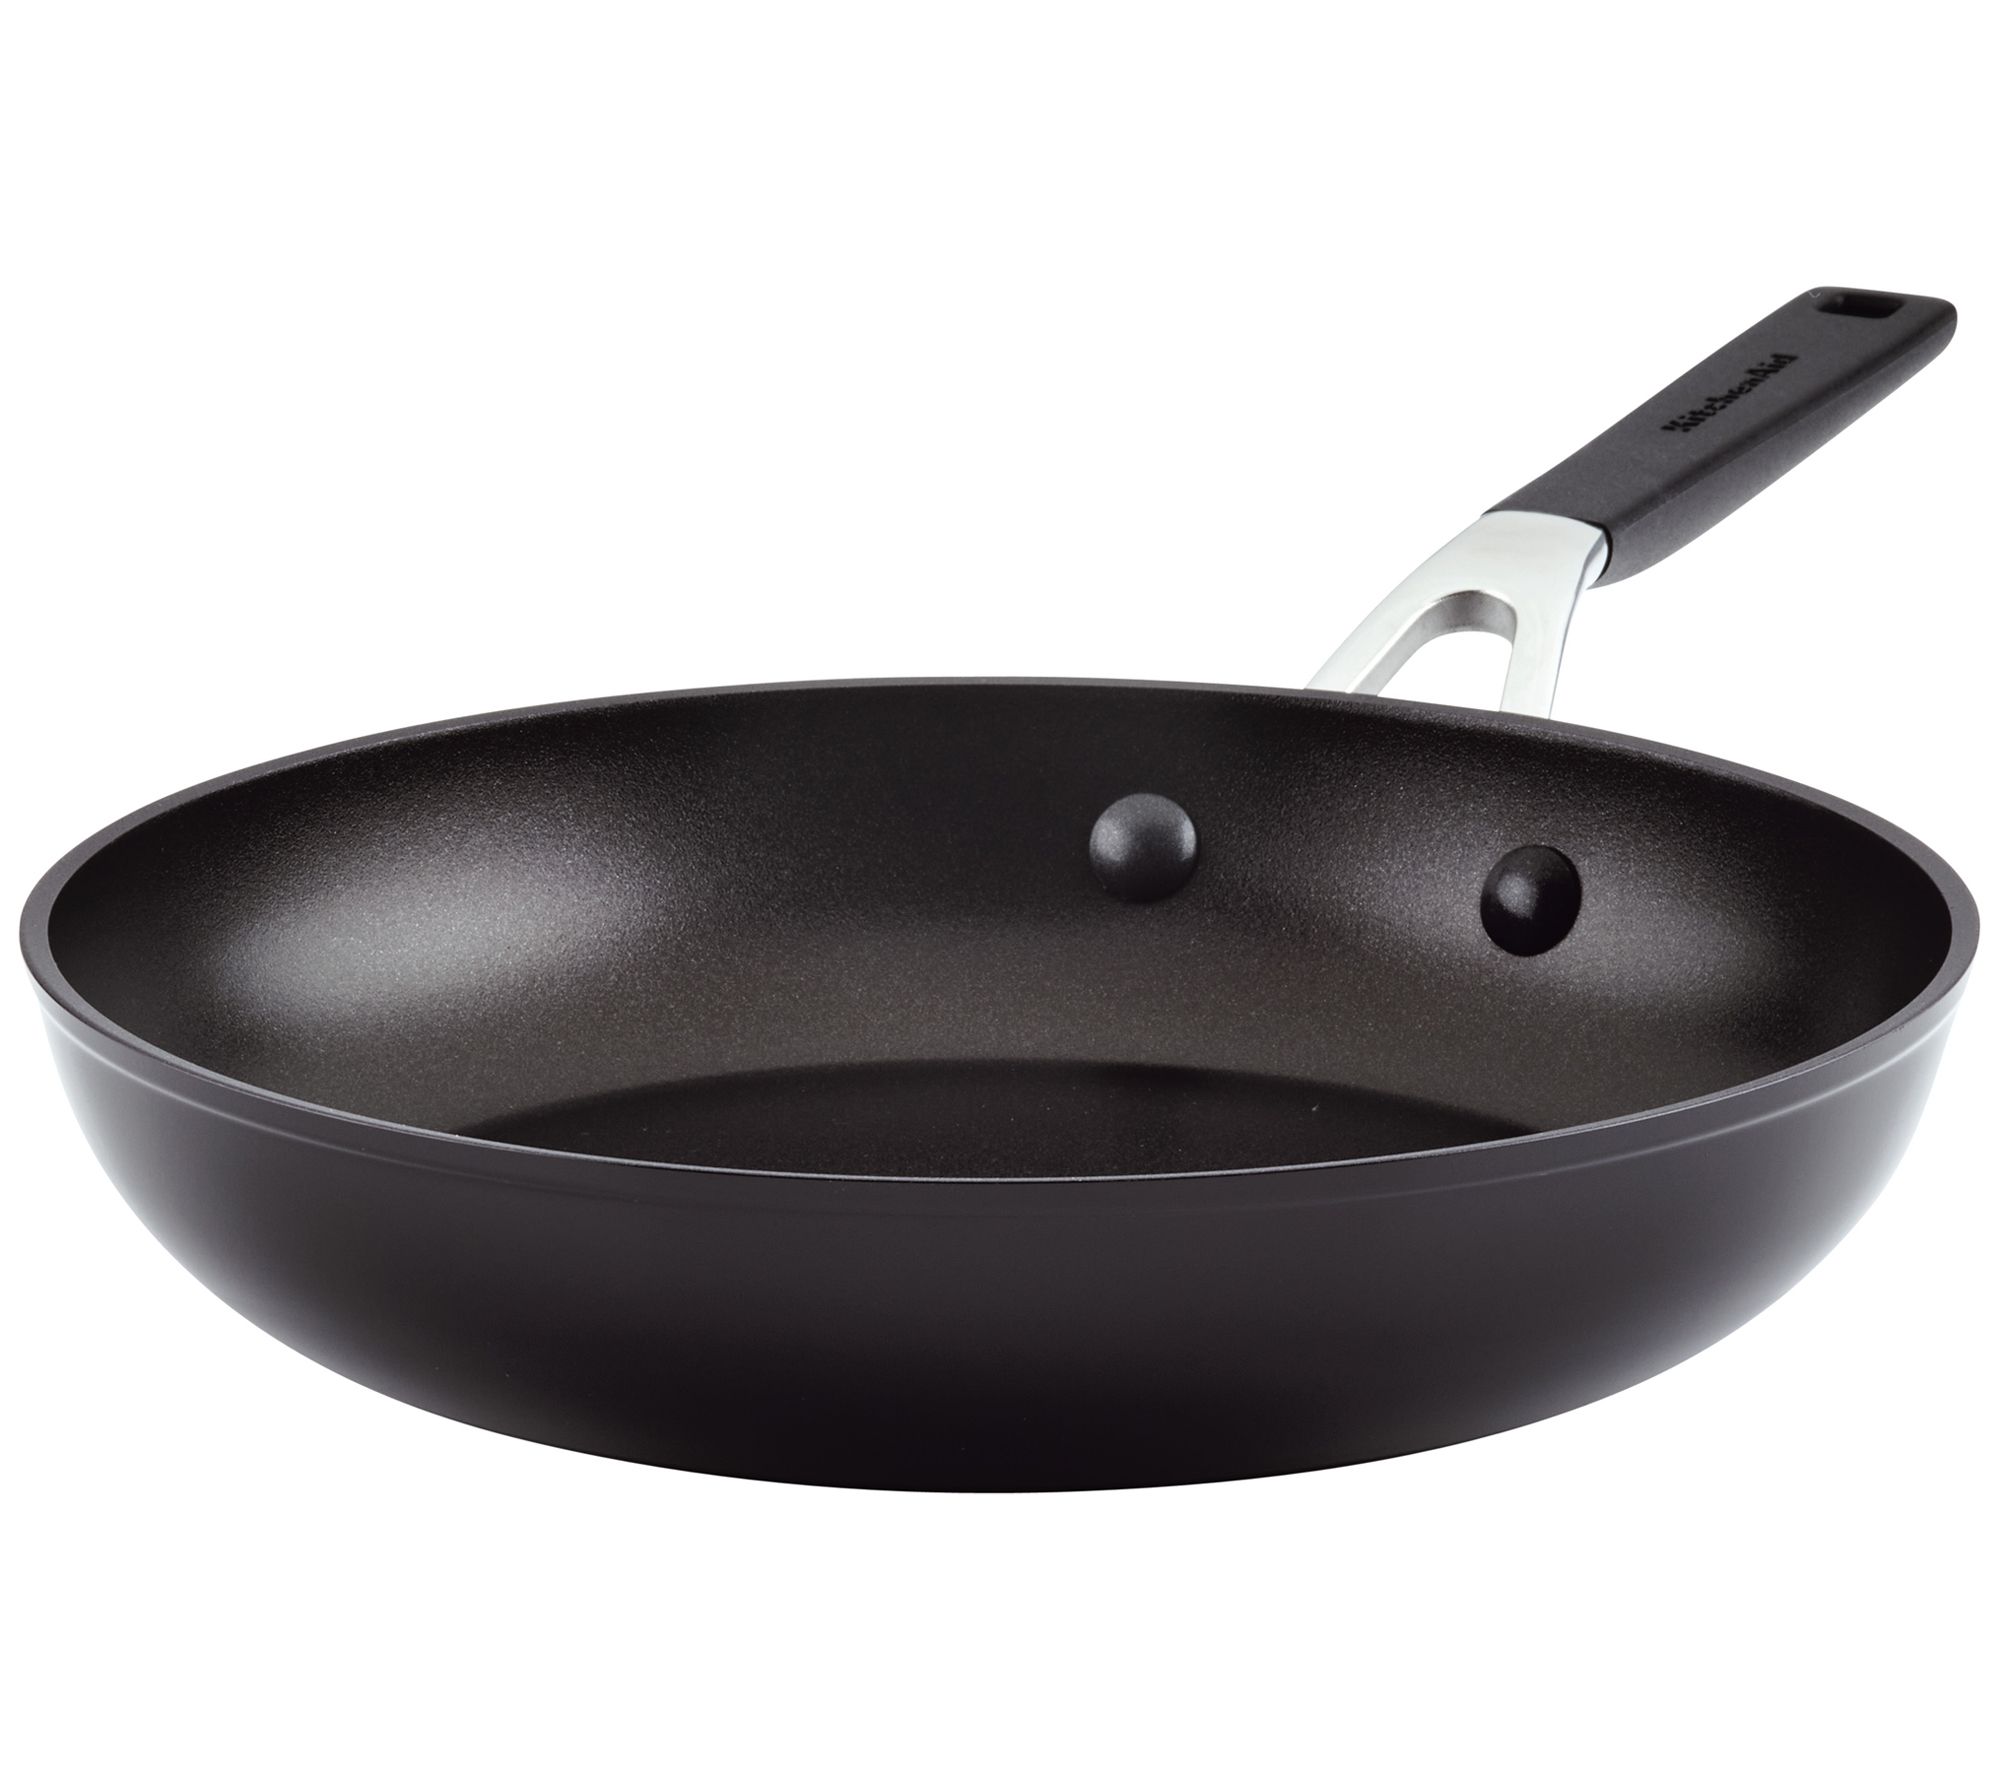 T-Fal Simply Cook Nonstick Cookware 2Pc Fry Pan Set 8 10 inch